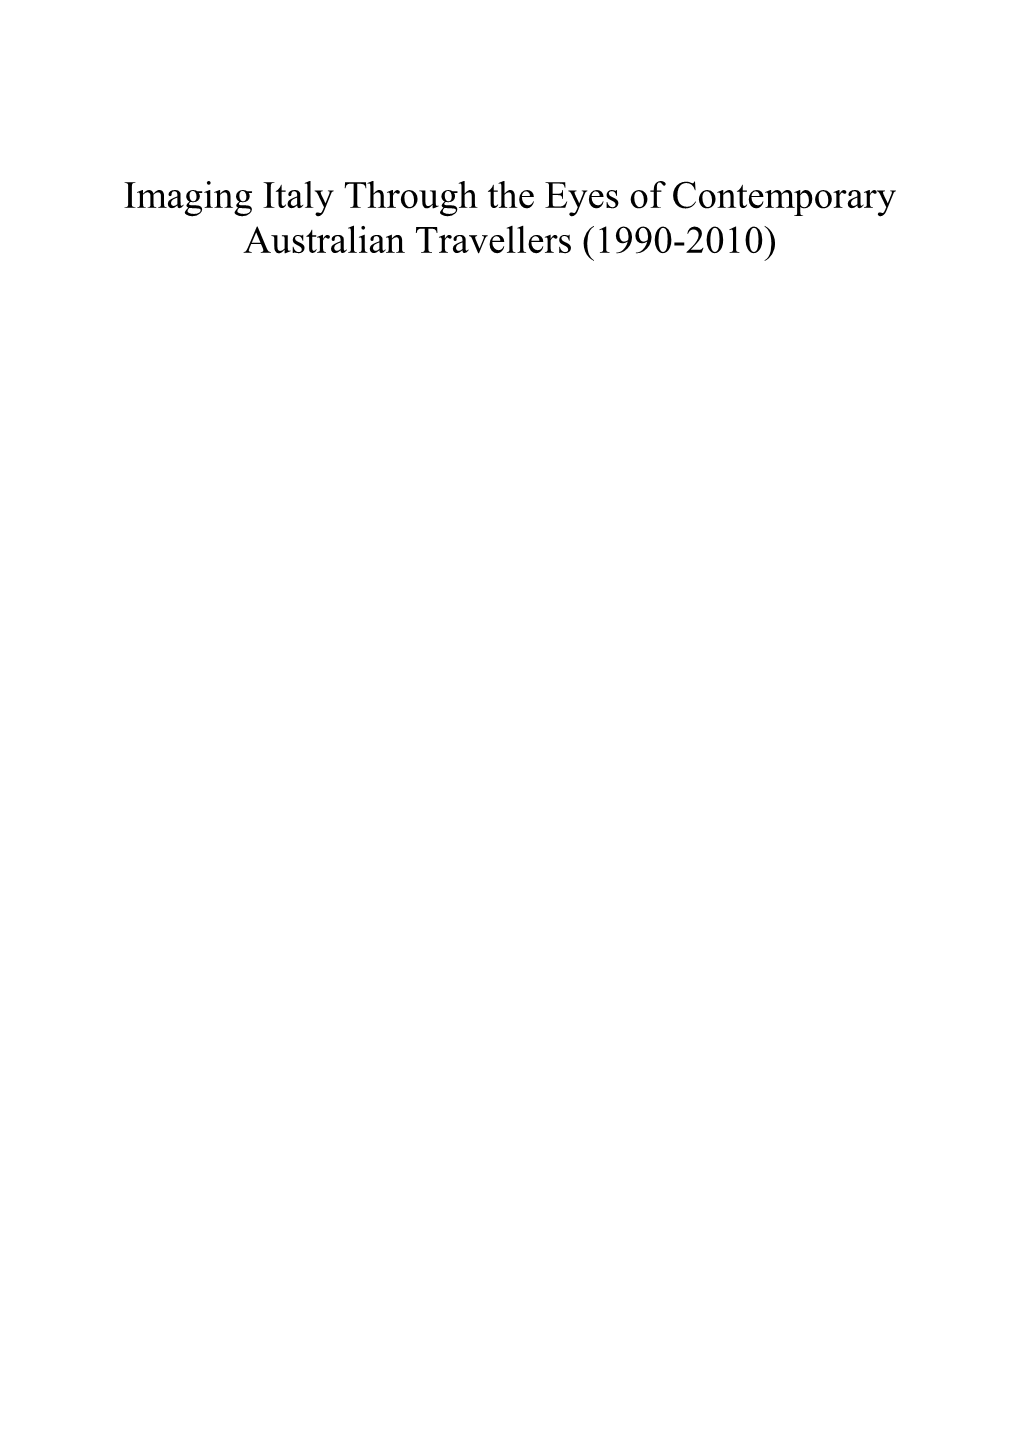 Imaging Italy Through the Eyes of Contemporary Australian Travellers (1990-2010)